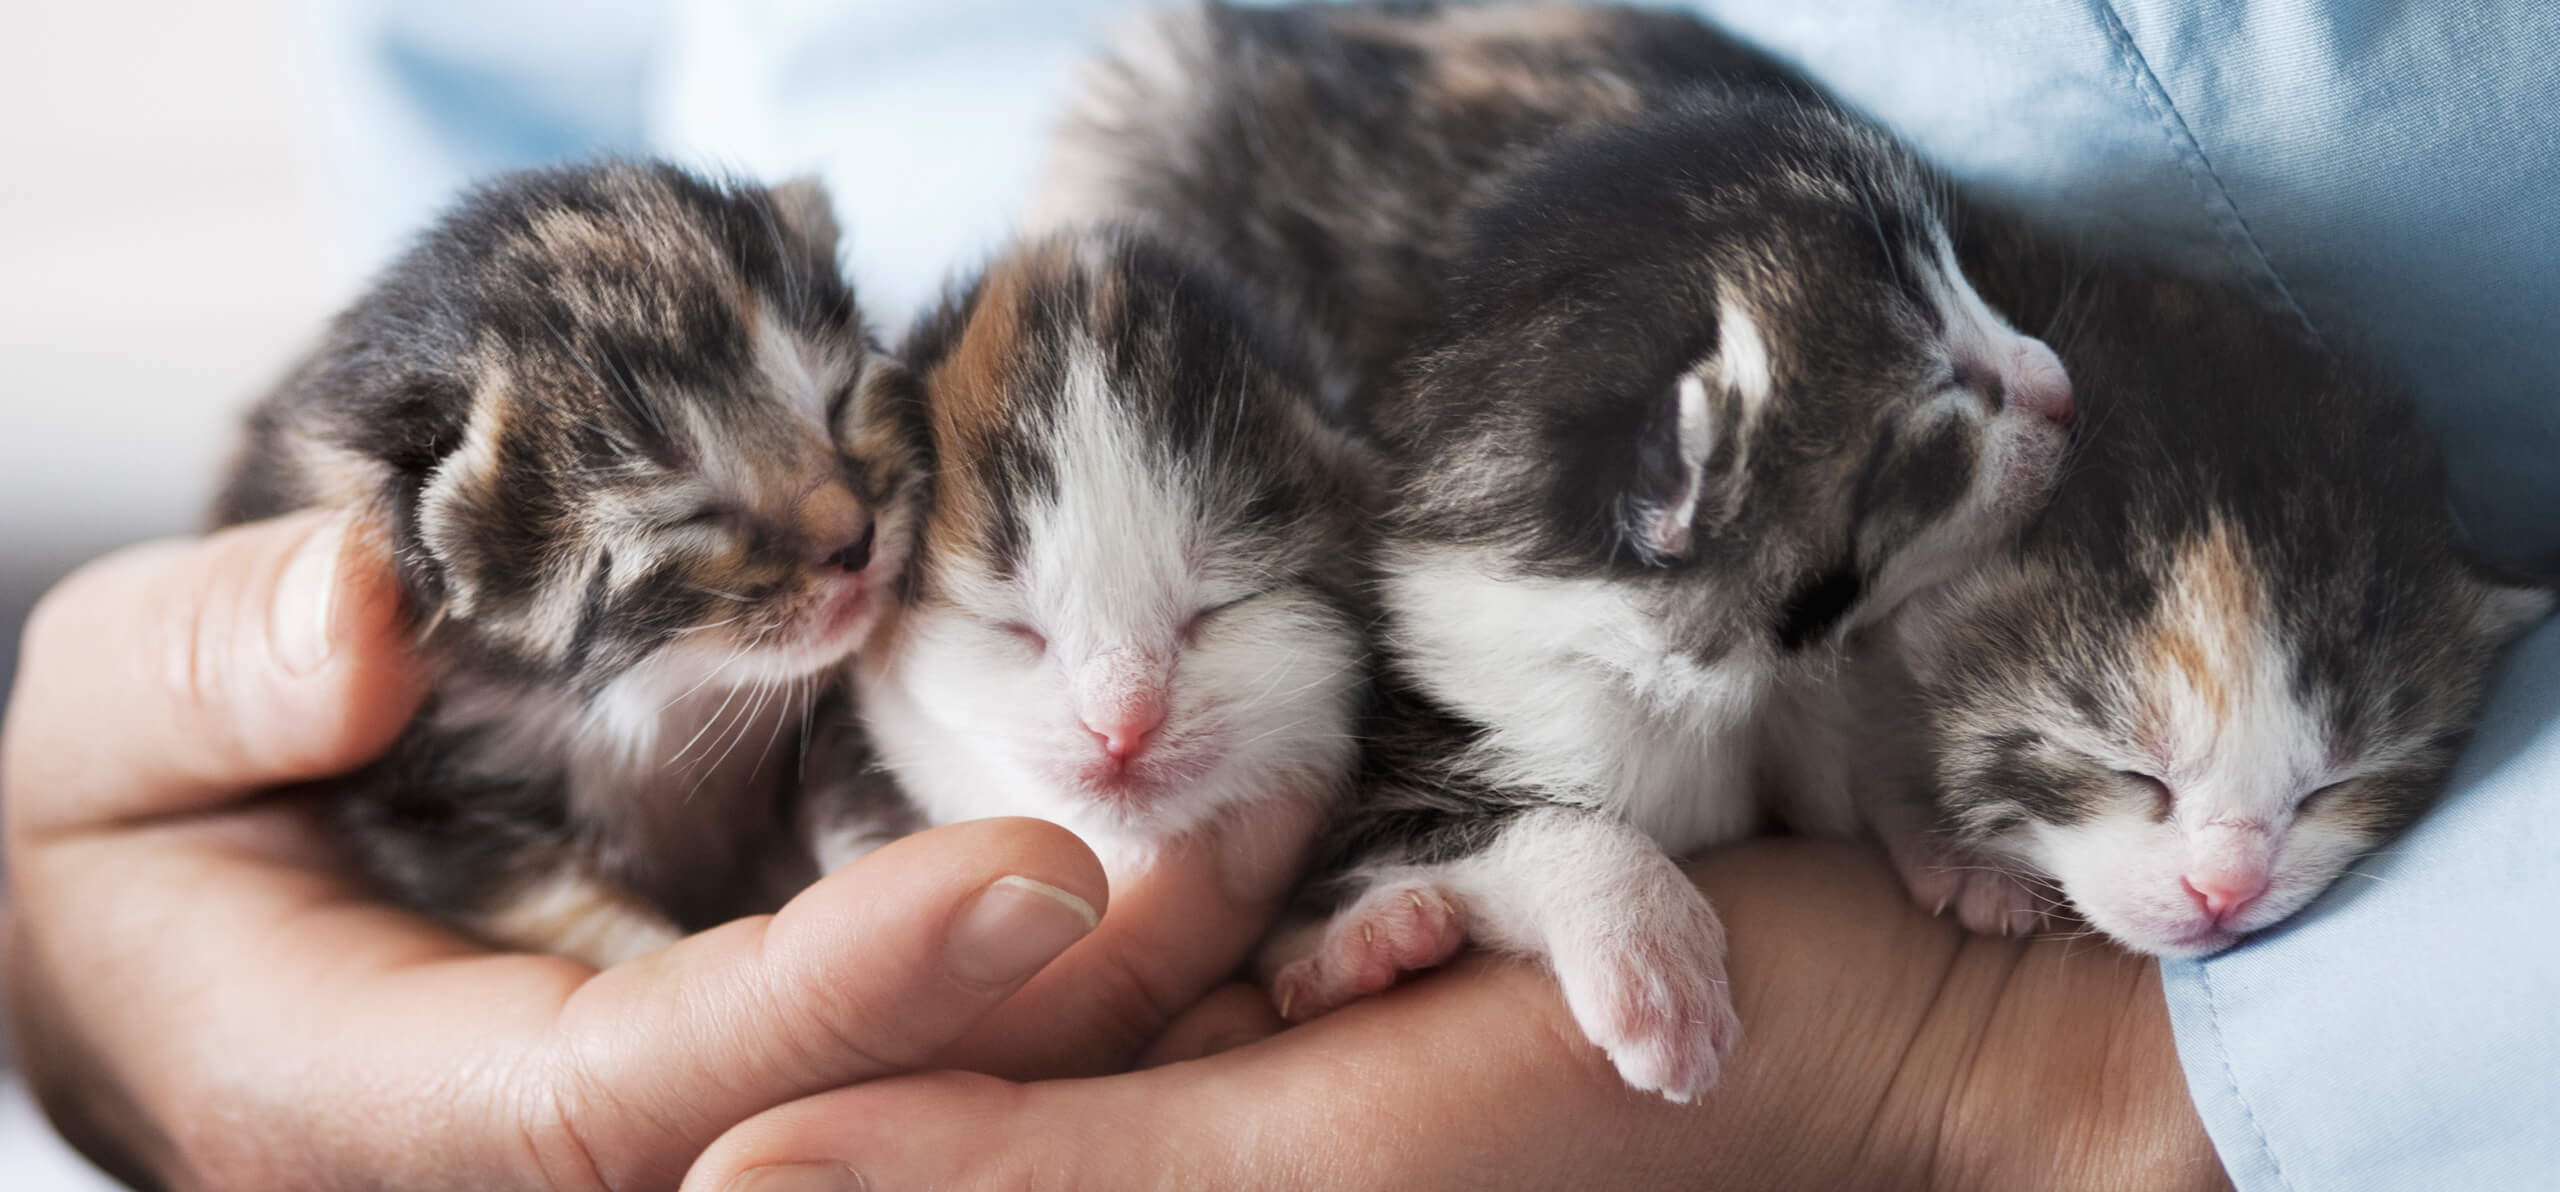 four kittens sleeping in both hands of an individual